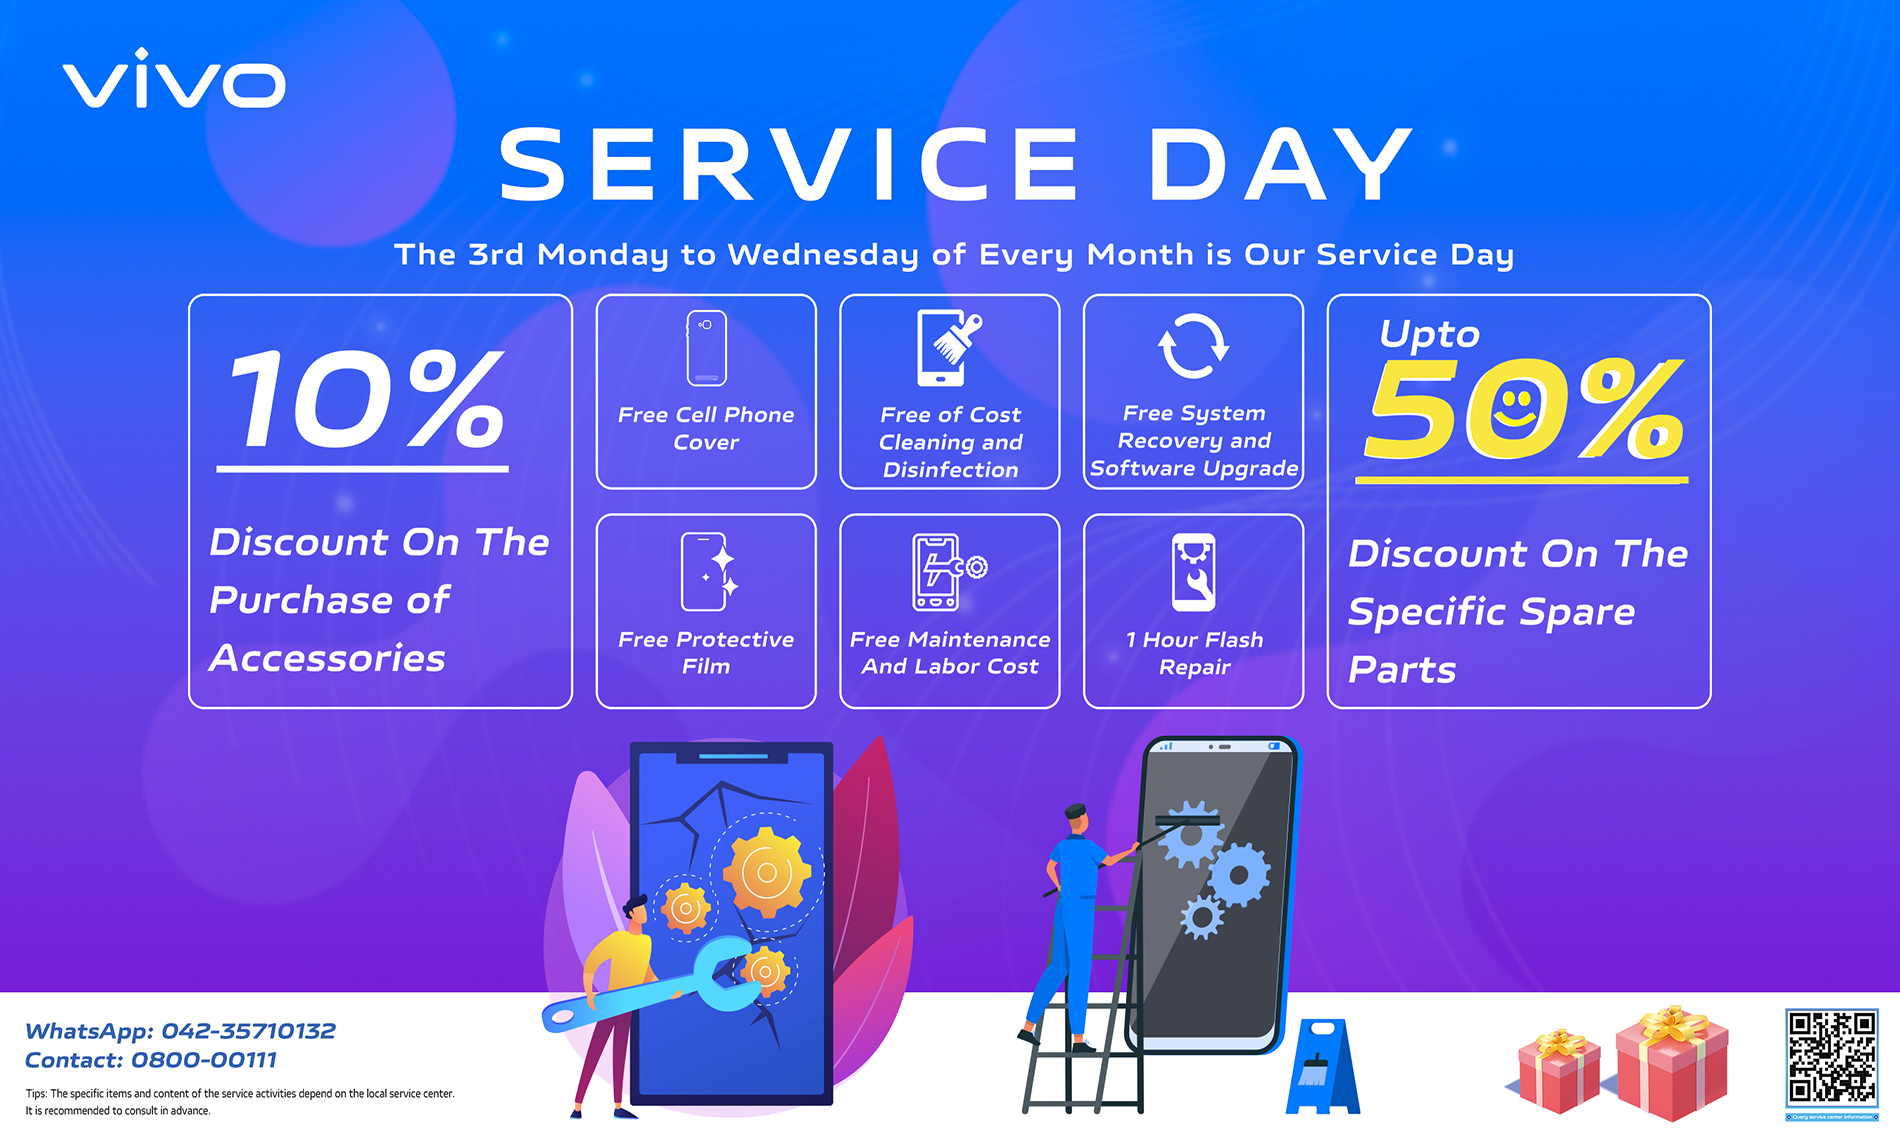 Save Big and Enjoy the Best on vivo Service Day